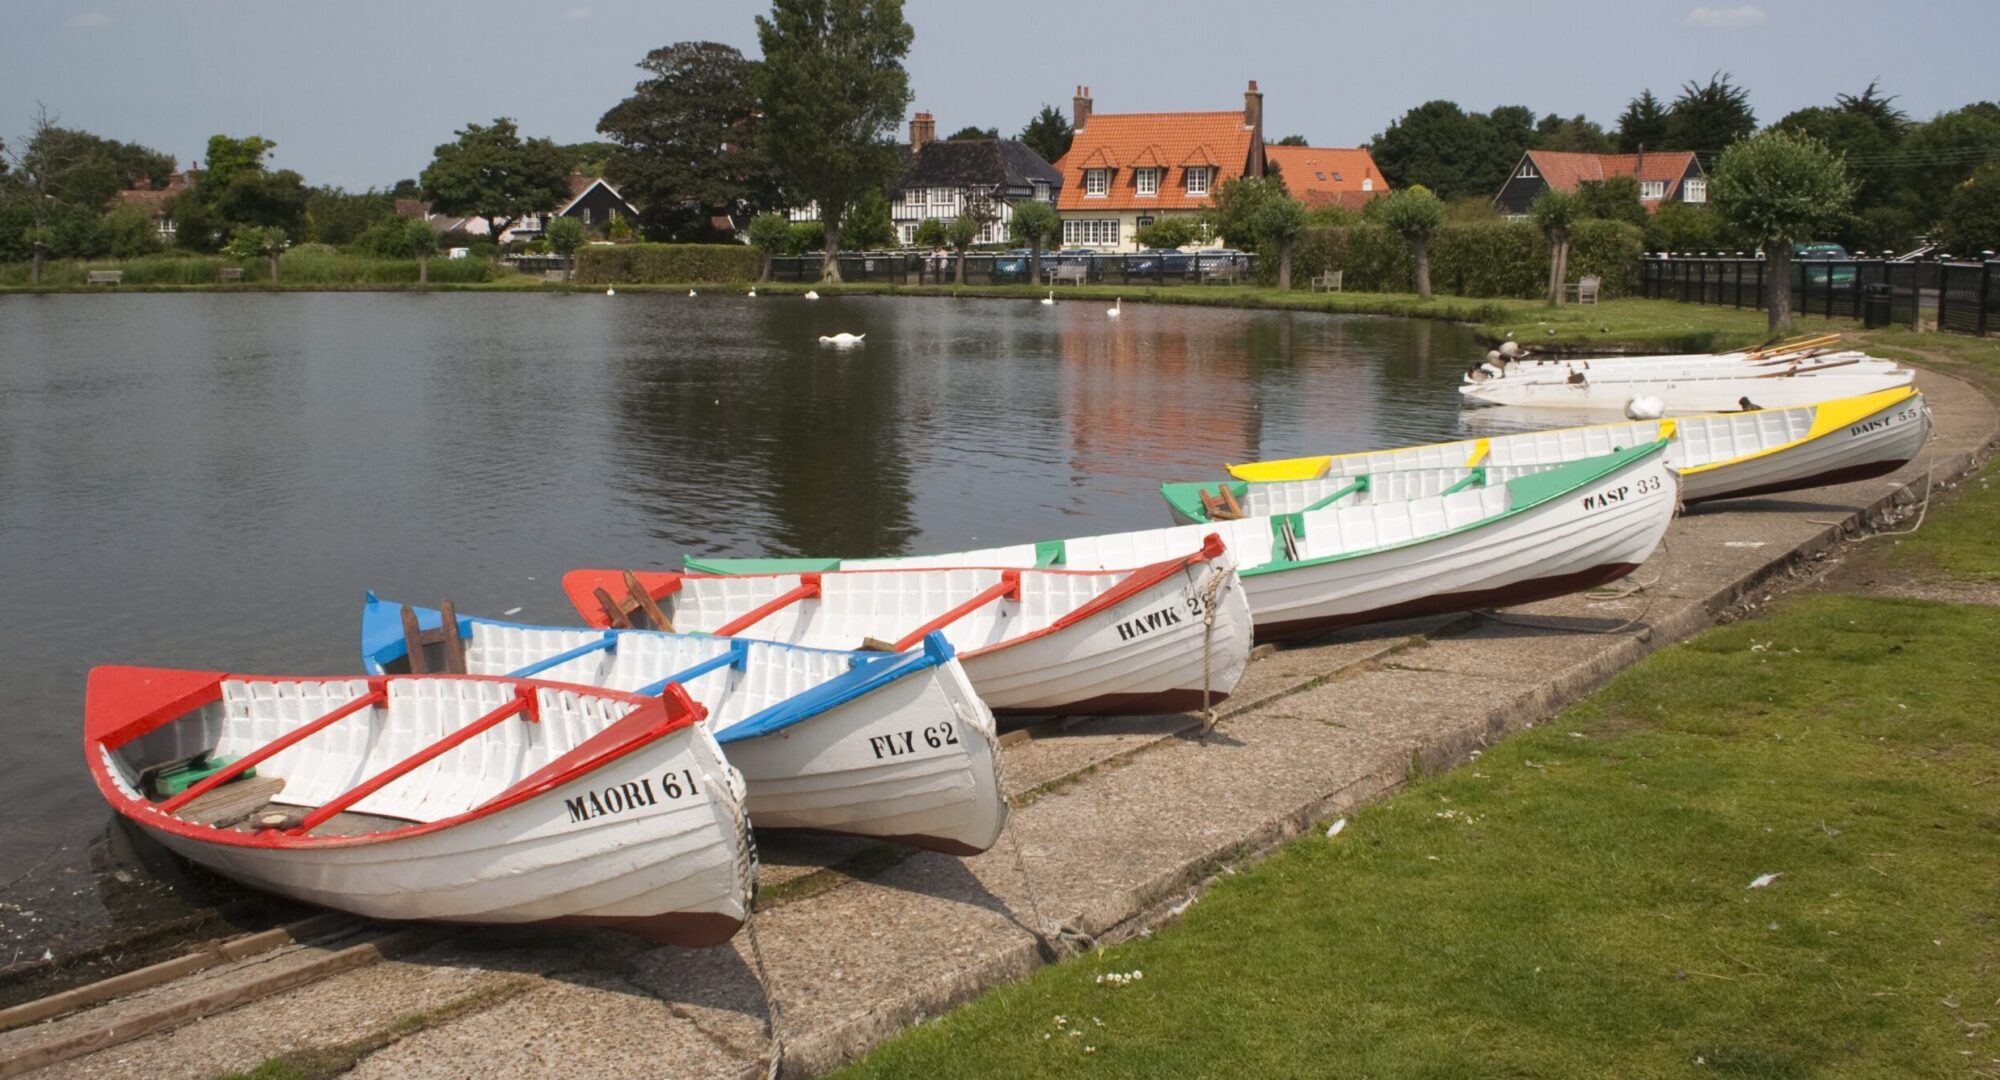 A row of boats lined up along the riverside.